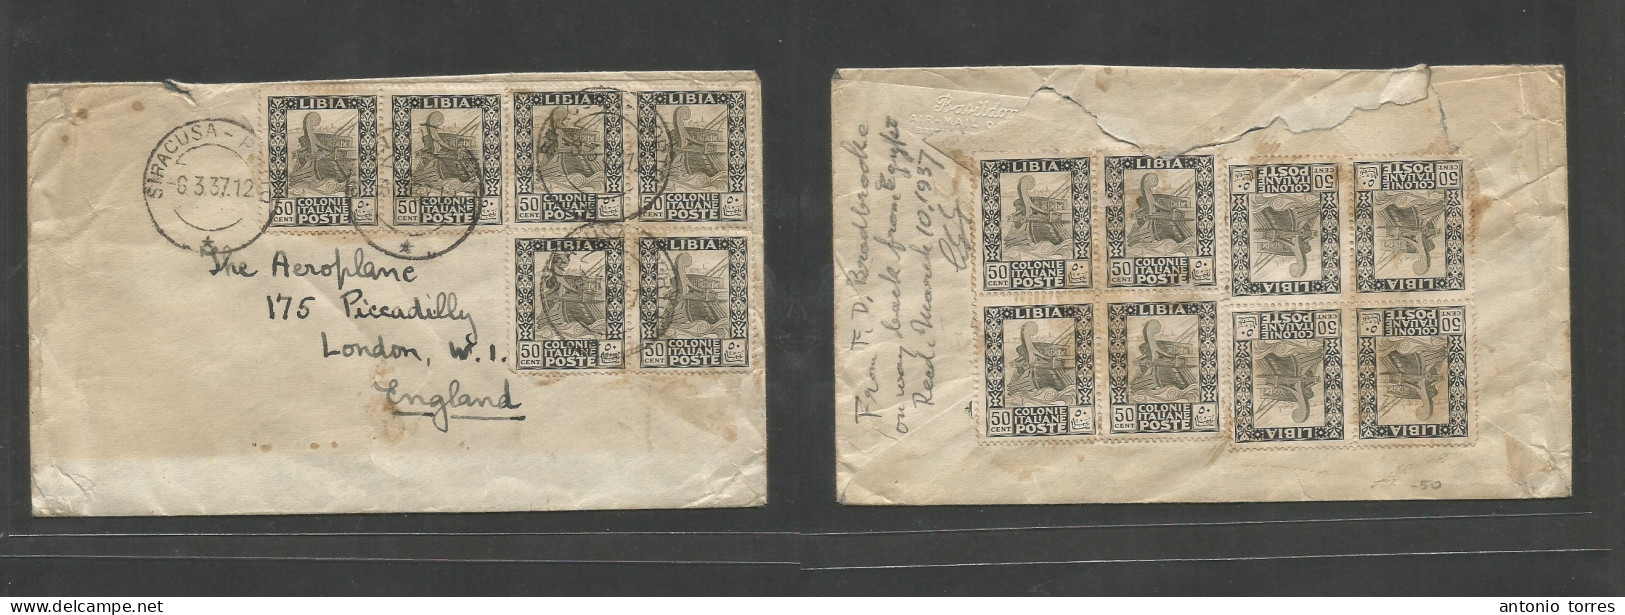 Libia. 1937 (6 March) Italian Admin. Siracusa - England, London. Multifkd Env Front And Reverse At 700c Rate. Fine. - Libyen